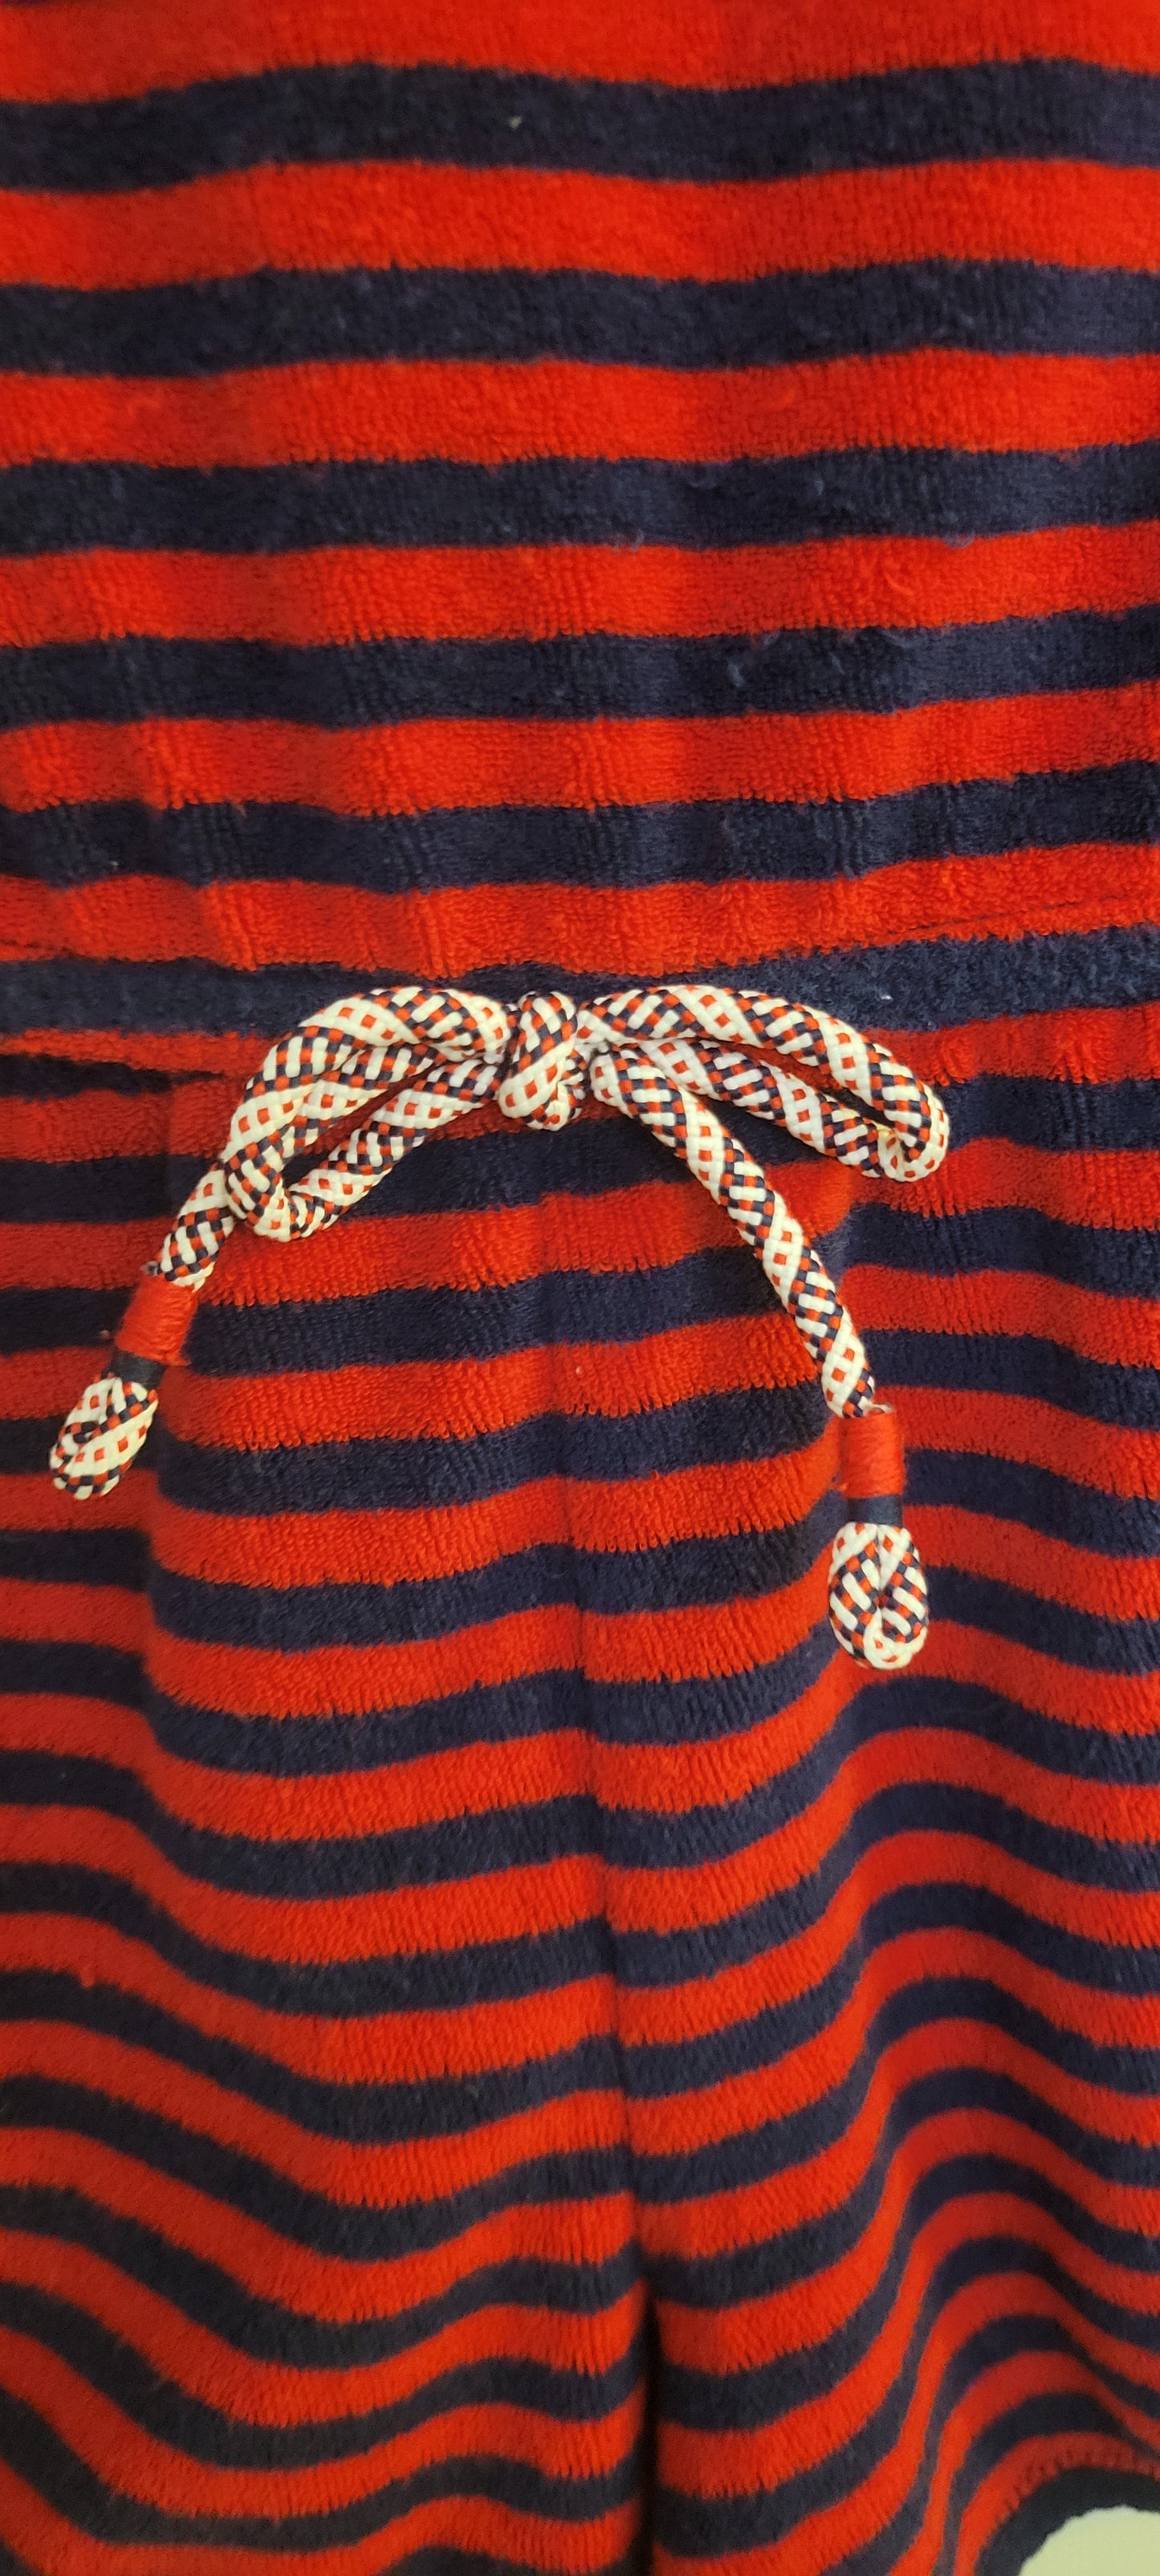 * REDUCED * Cat & Jack Red and Blue Striped Terry Cloth Cover-Up Romper, Size S (6/6X)